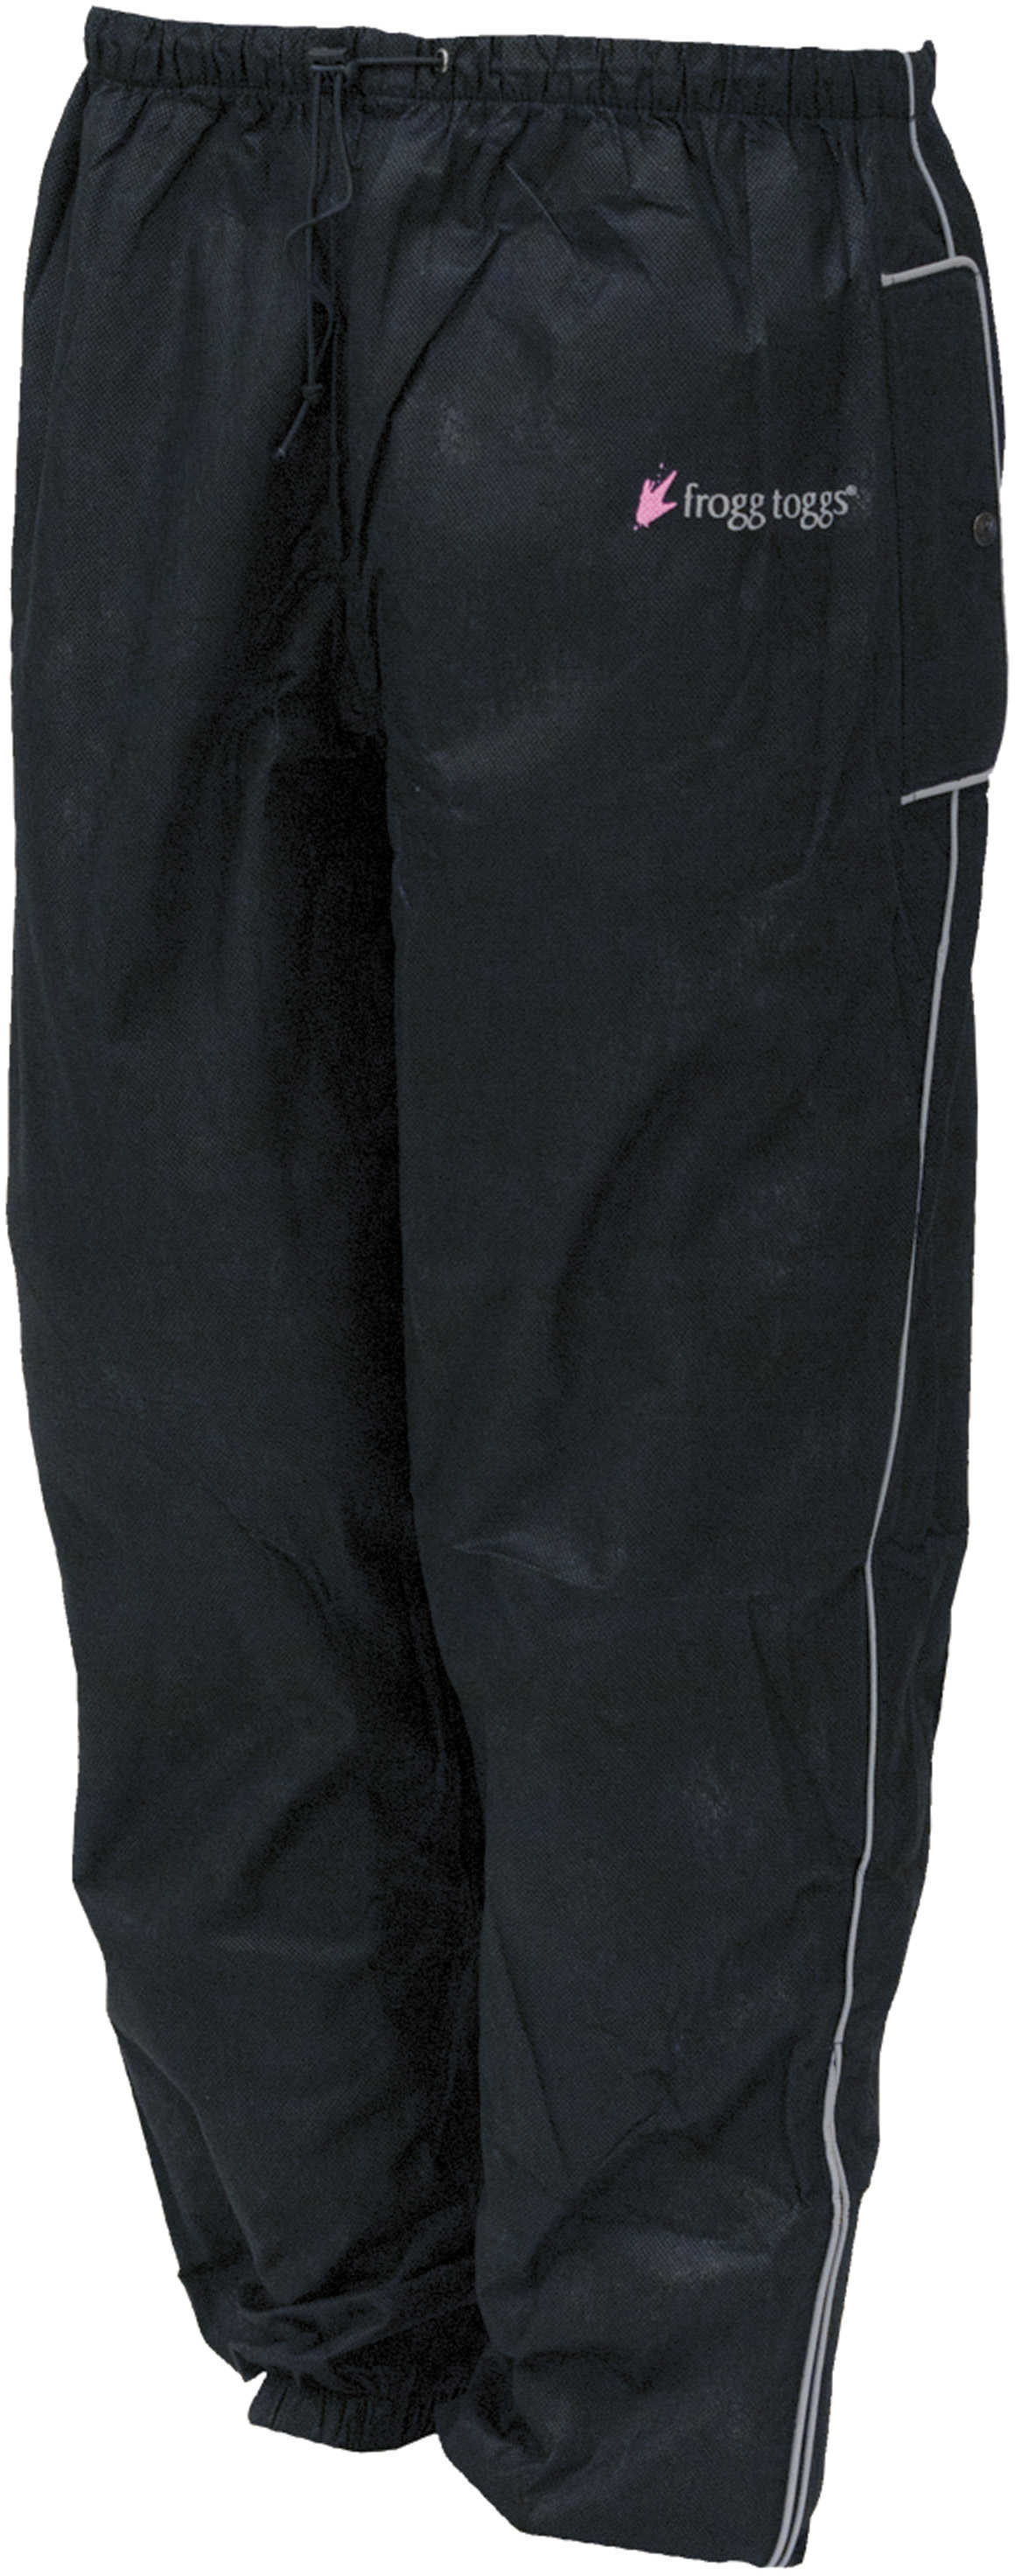 Frogg Toggs Women's Sweet T Pant Black Small FT83532-01SM